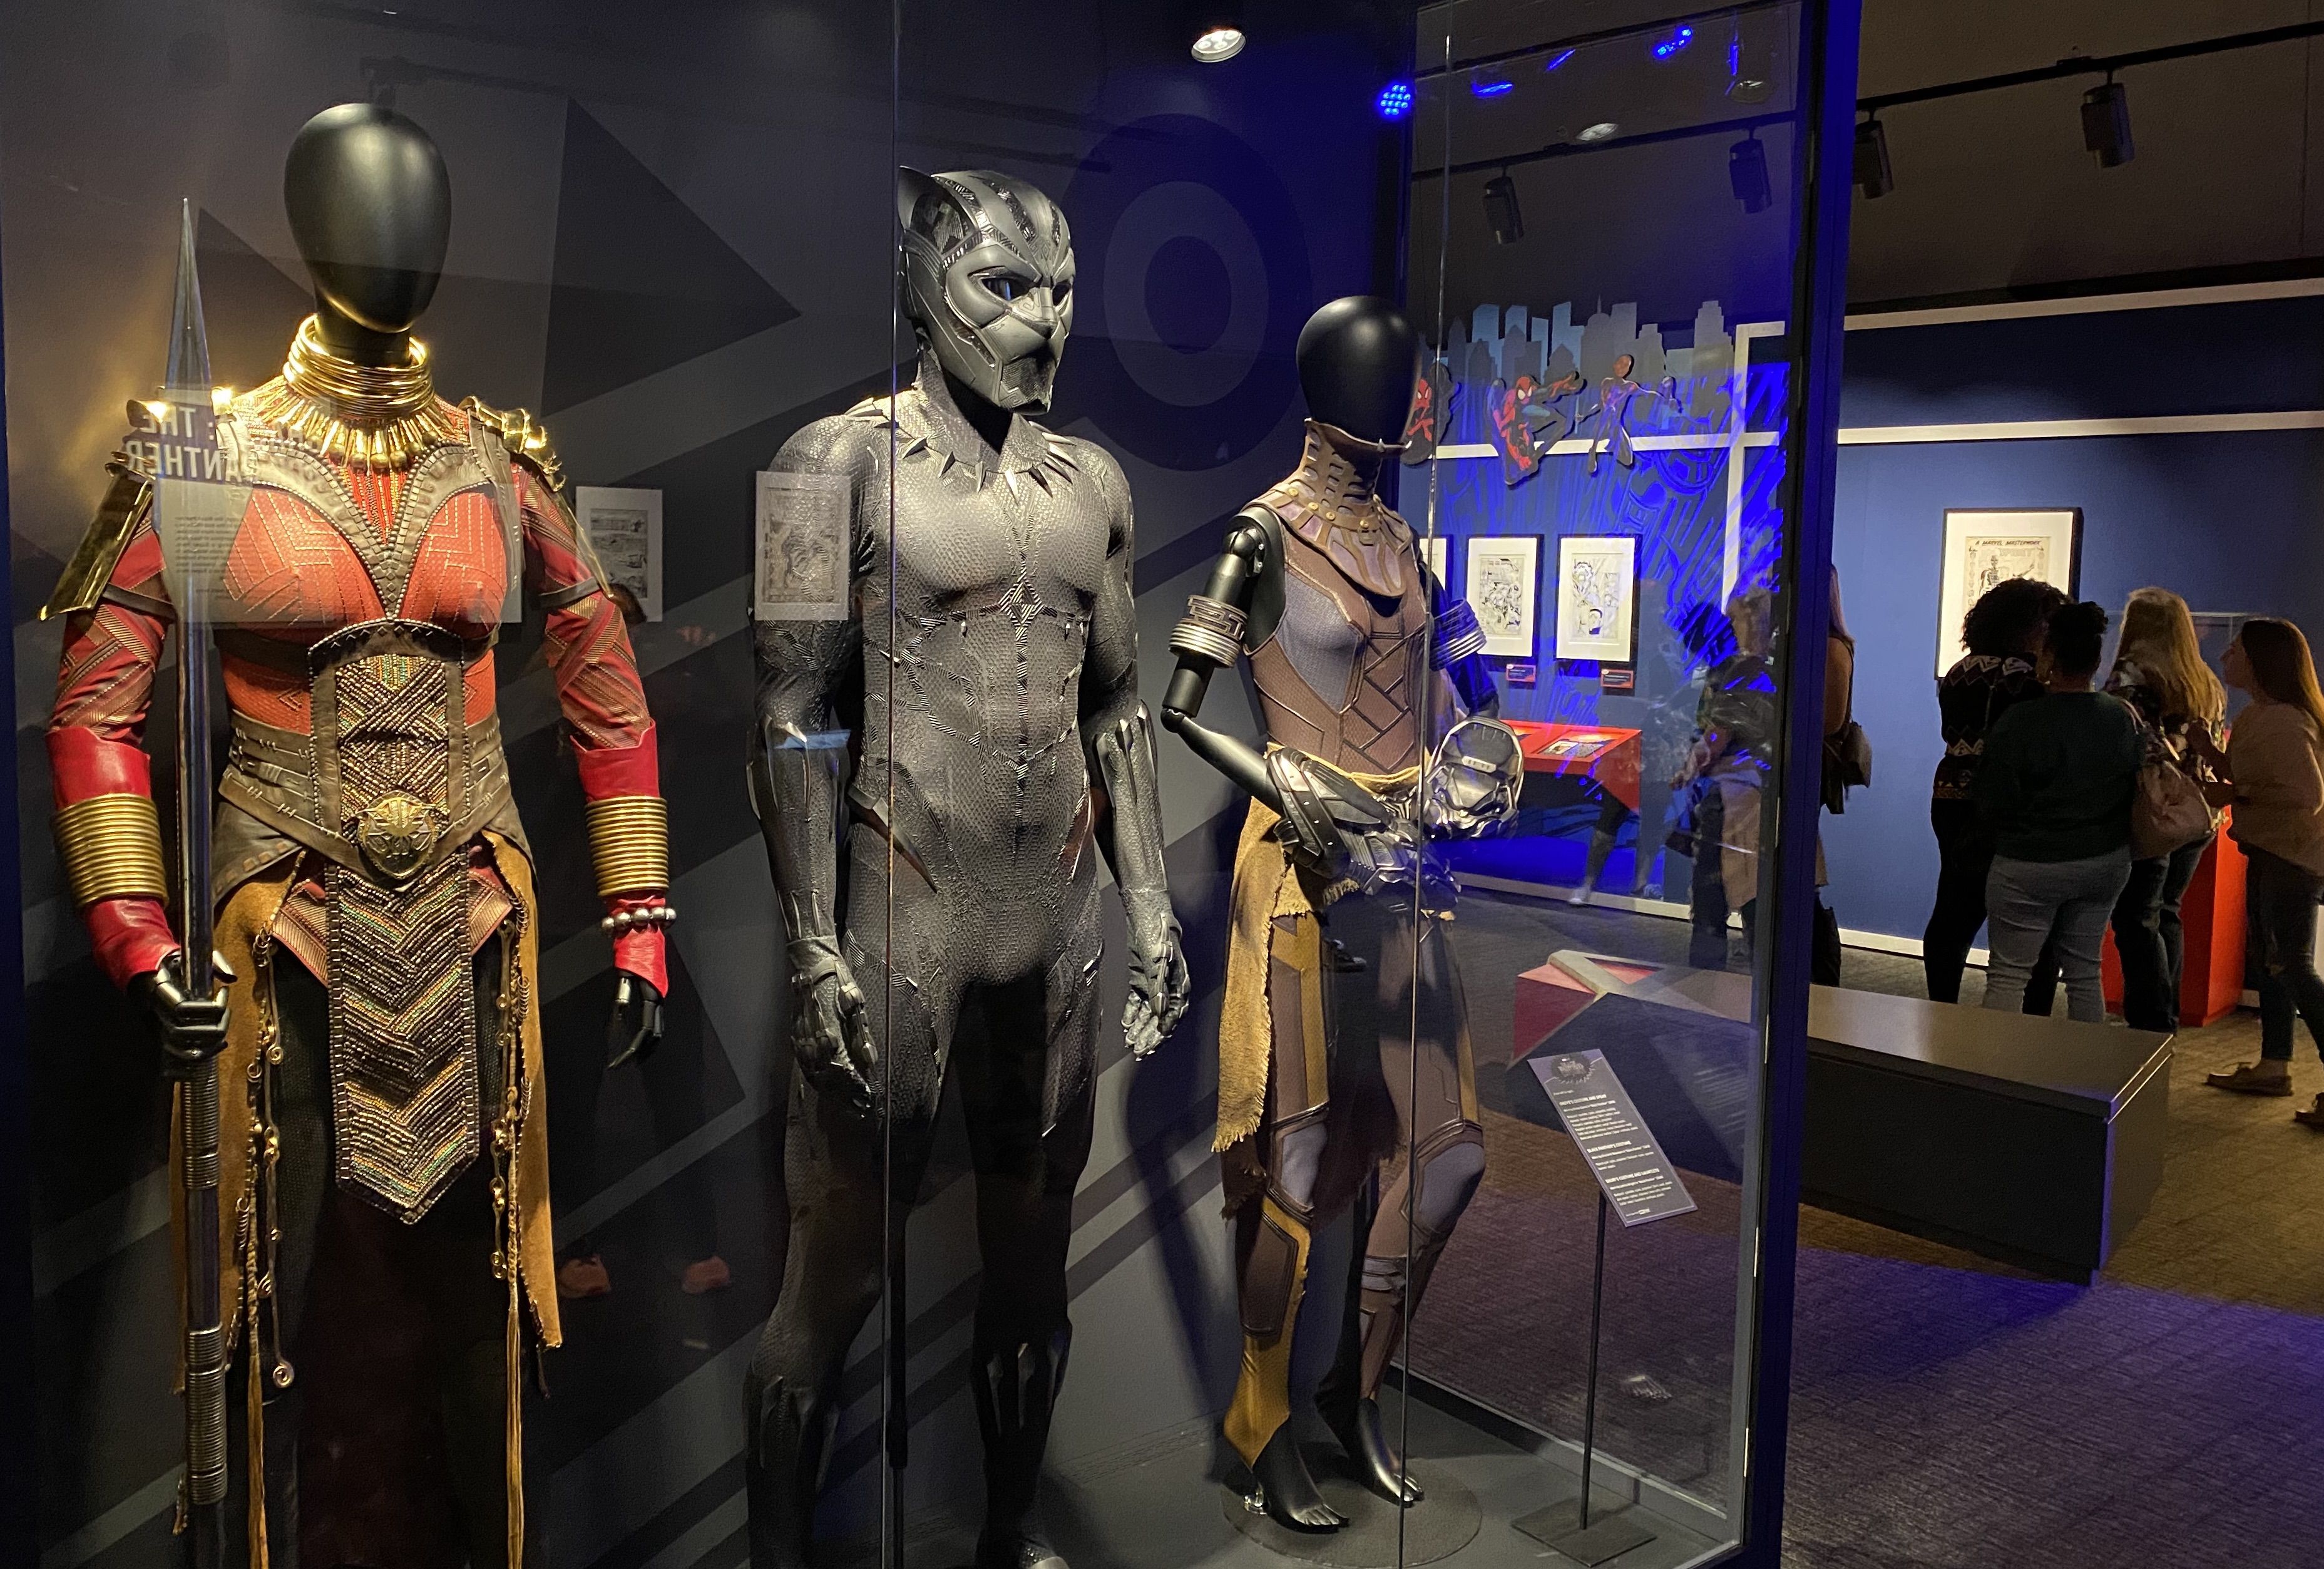 A display of costumes from the 2018 "Black Panther" film